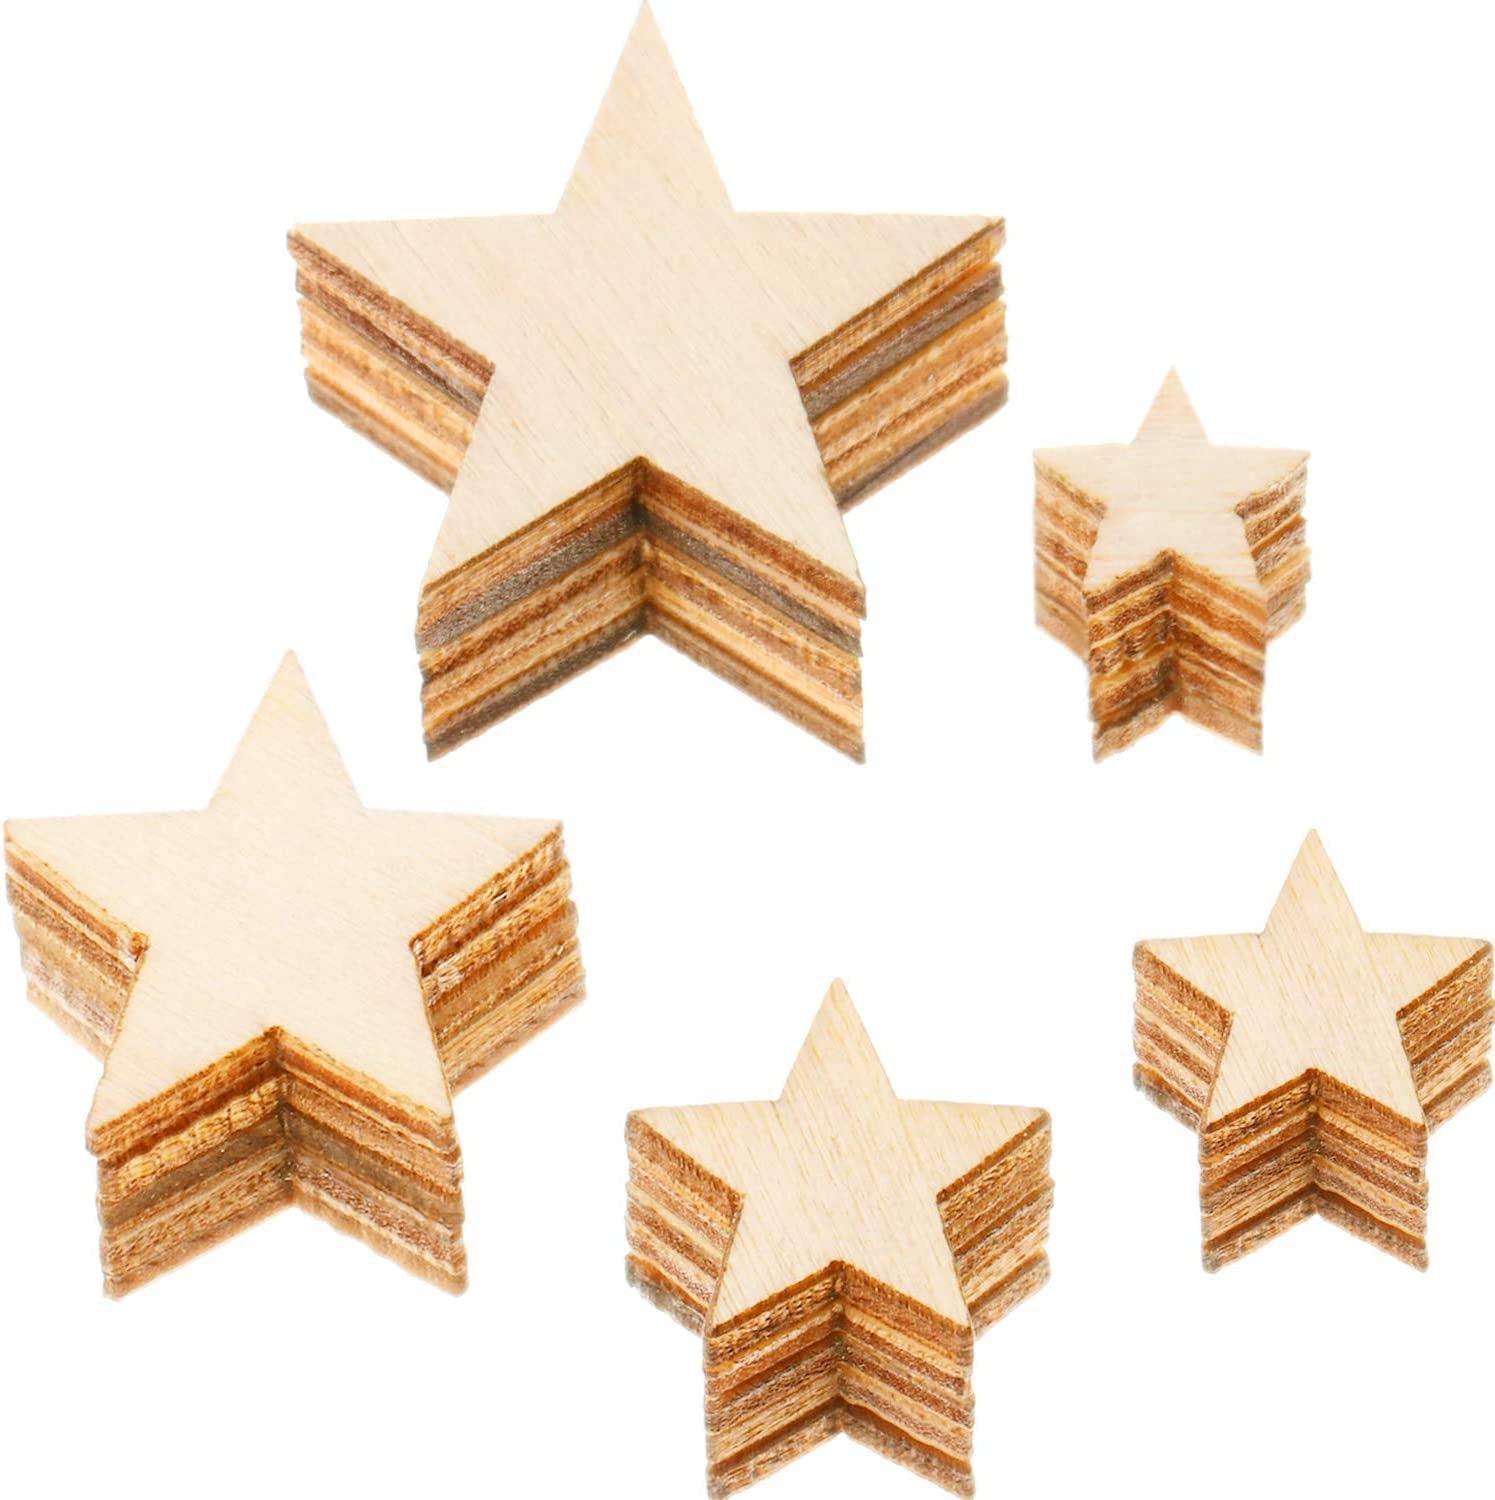 500 Pieces Wooden Star Slices Wood Cutouts Blank Star Shape Wood Unfinished Star Ornaments DIY Supplies, 5 Sizes - WoodArtSupply